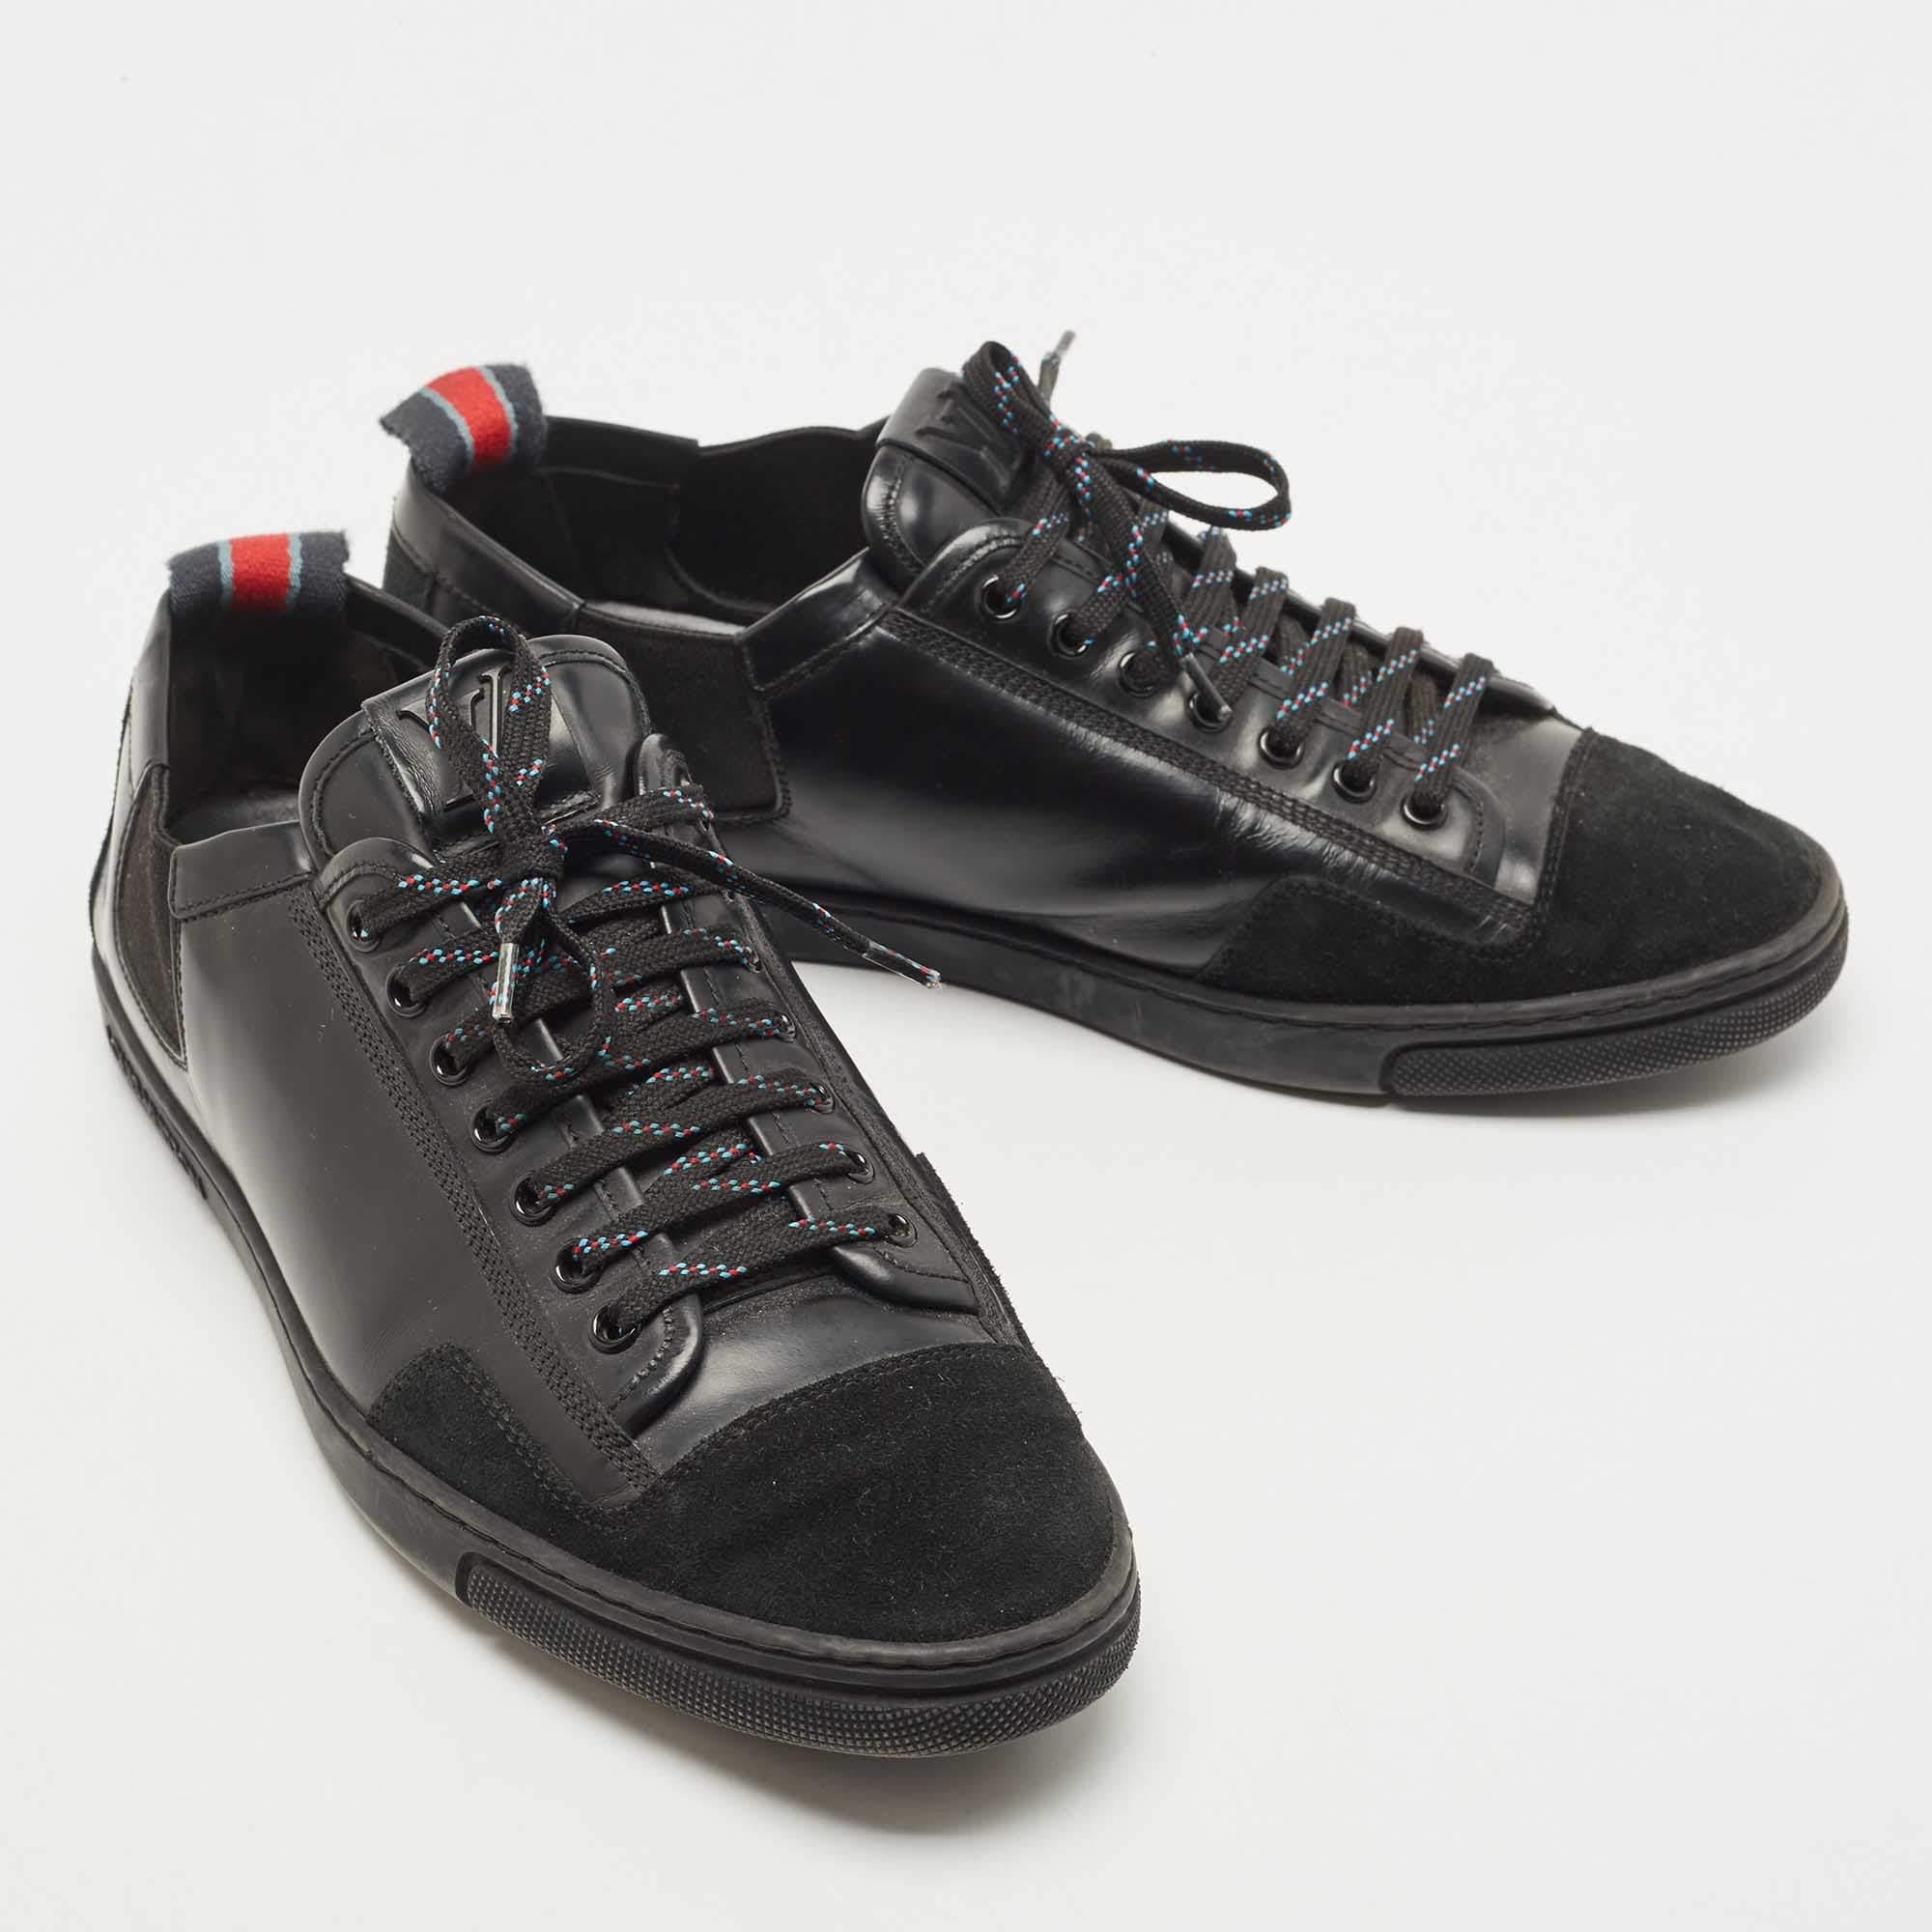 Louis Vuitton Black Leather and Suede Low Top Sneakers Size 41 In Good Condition For Sale In Dubai, Al Qouz 2